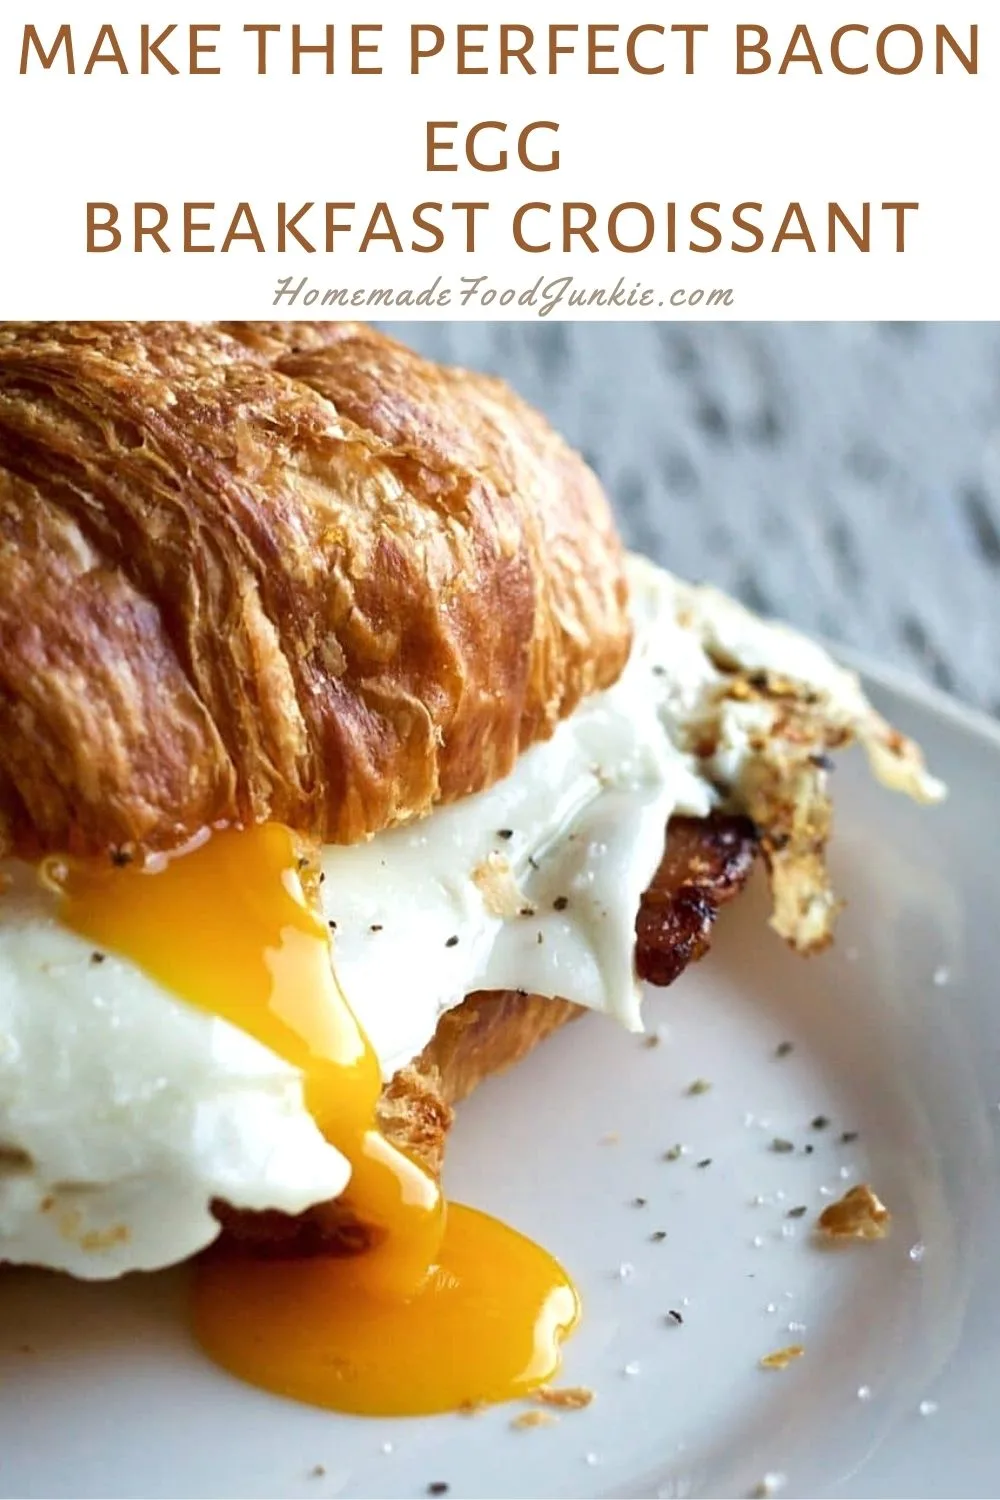 How To Make The Perfect Bacon Egg Breakfast Croissant-Pin Image